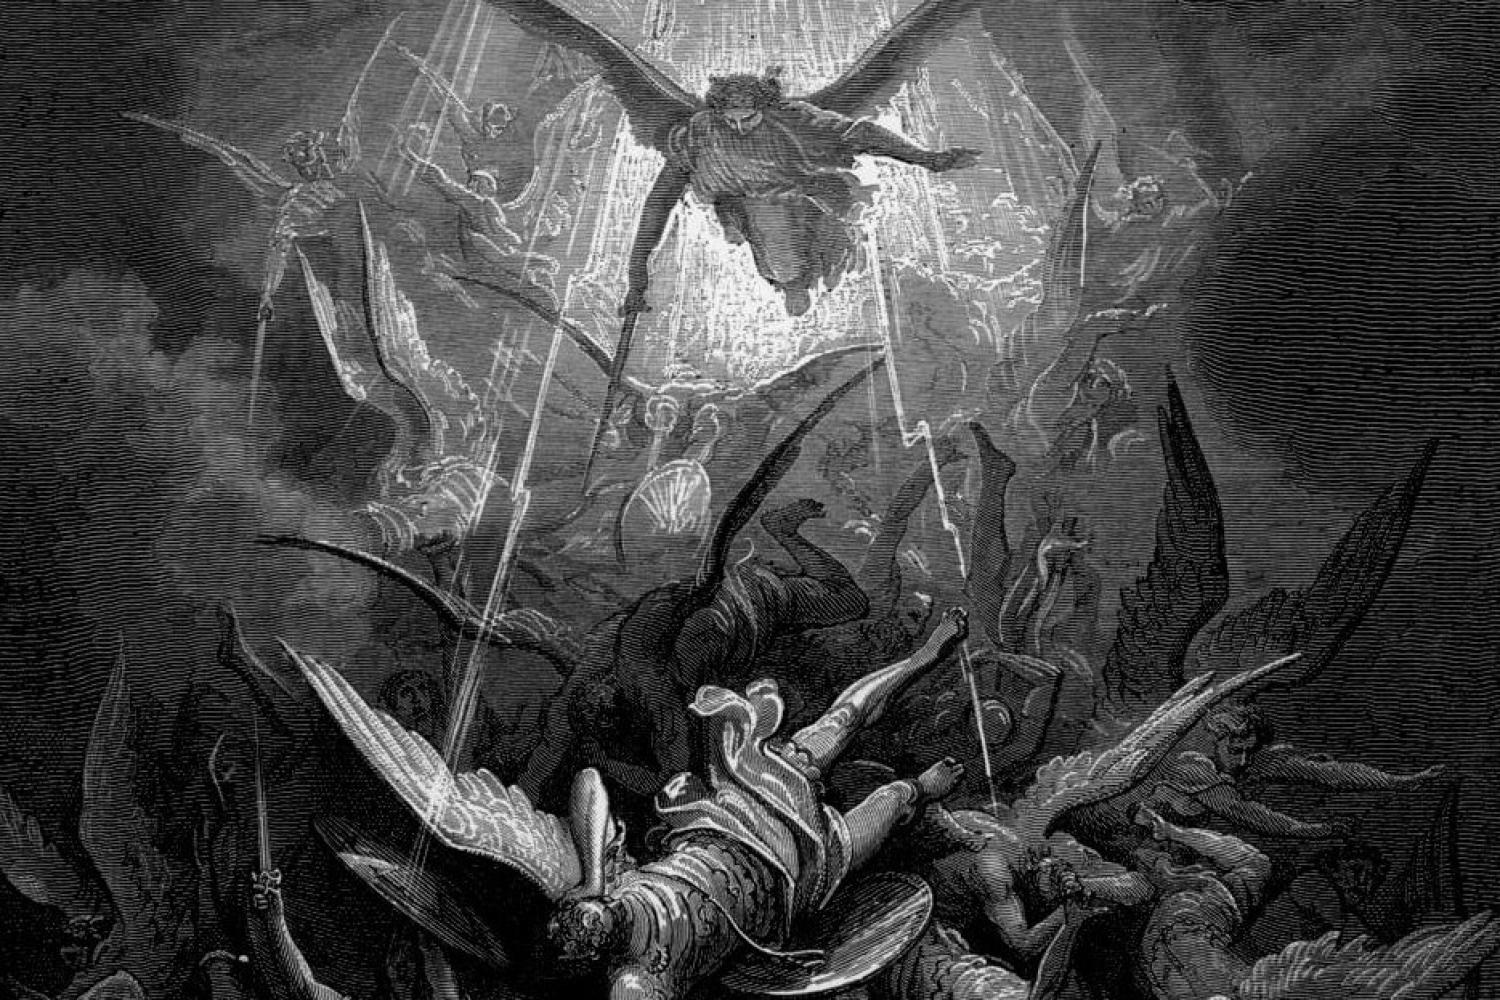 &quot;Michael Casts Out All of the Fallen Angels,&quot; by Gustave Dore